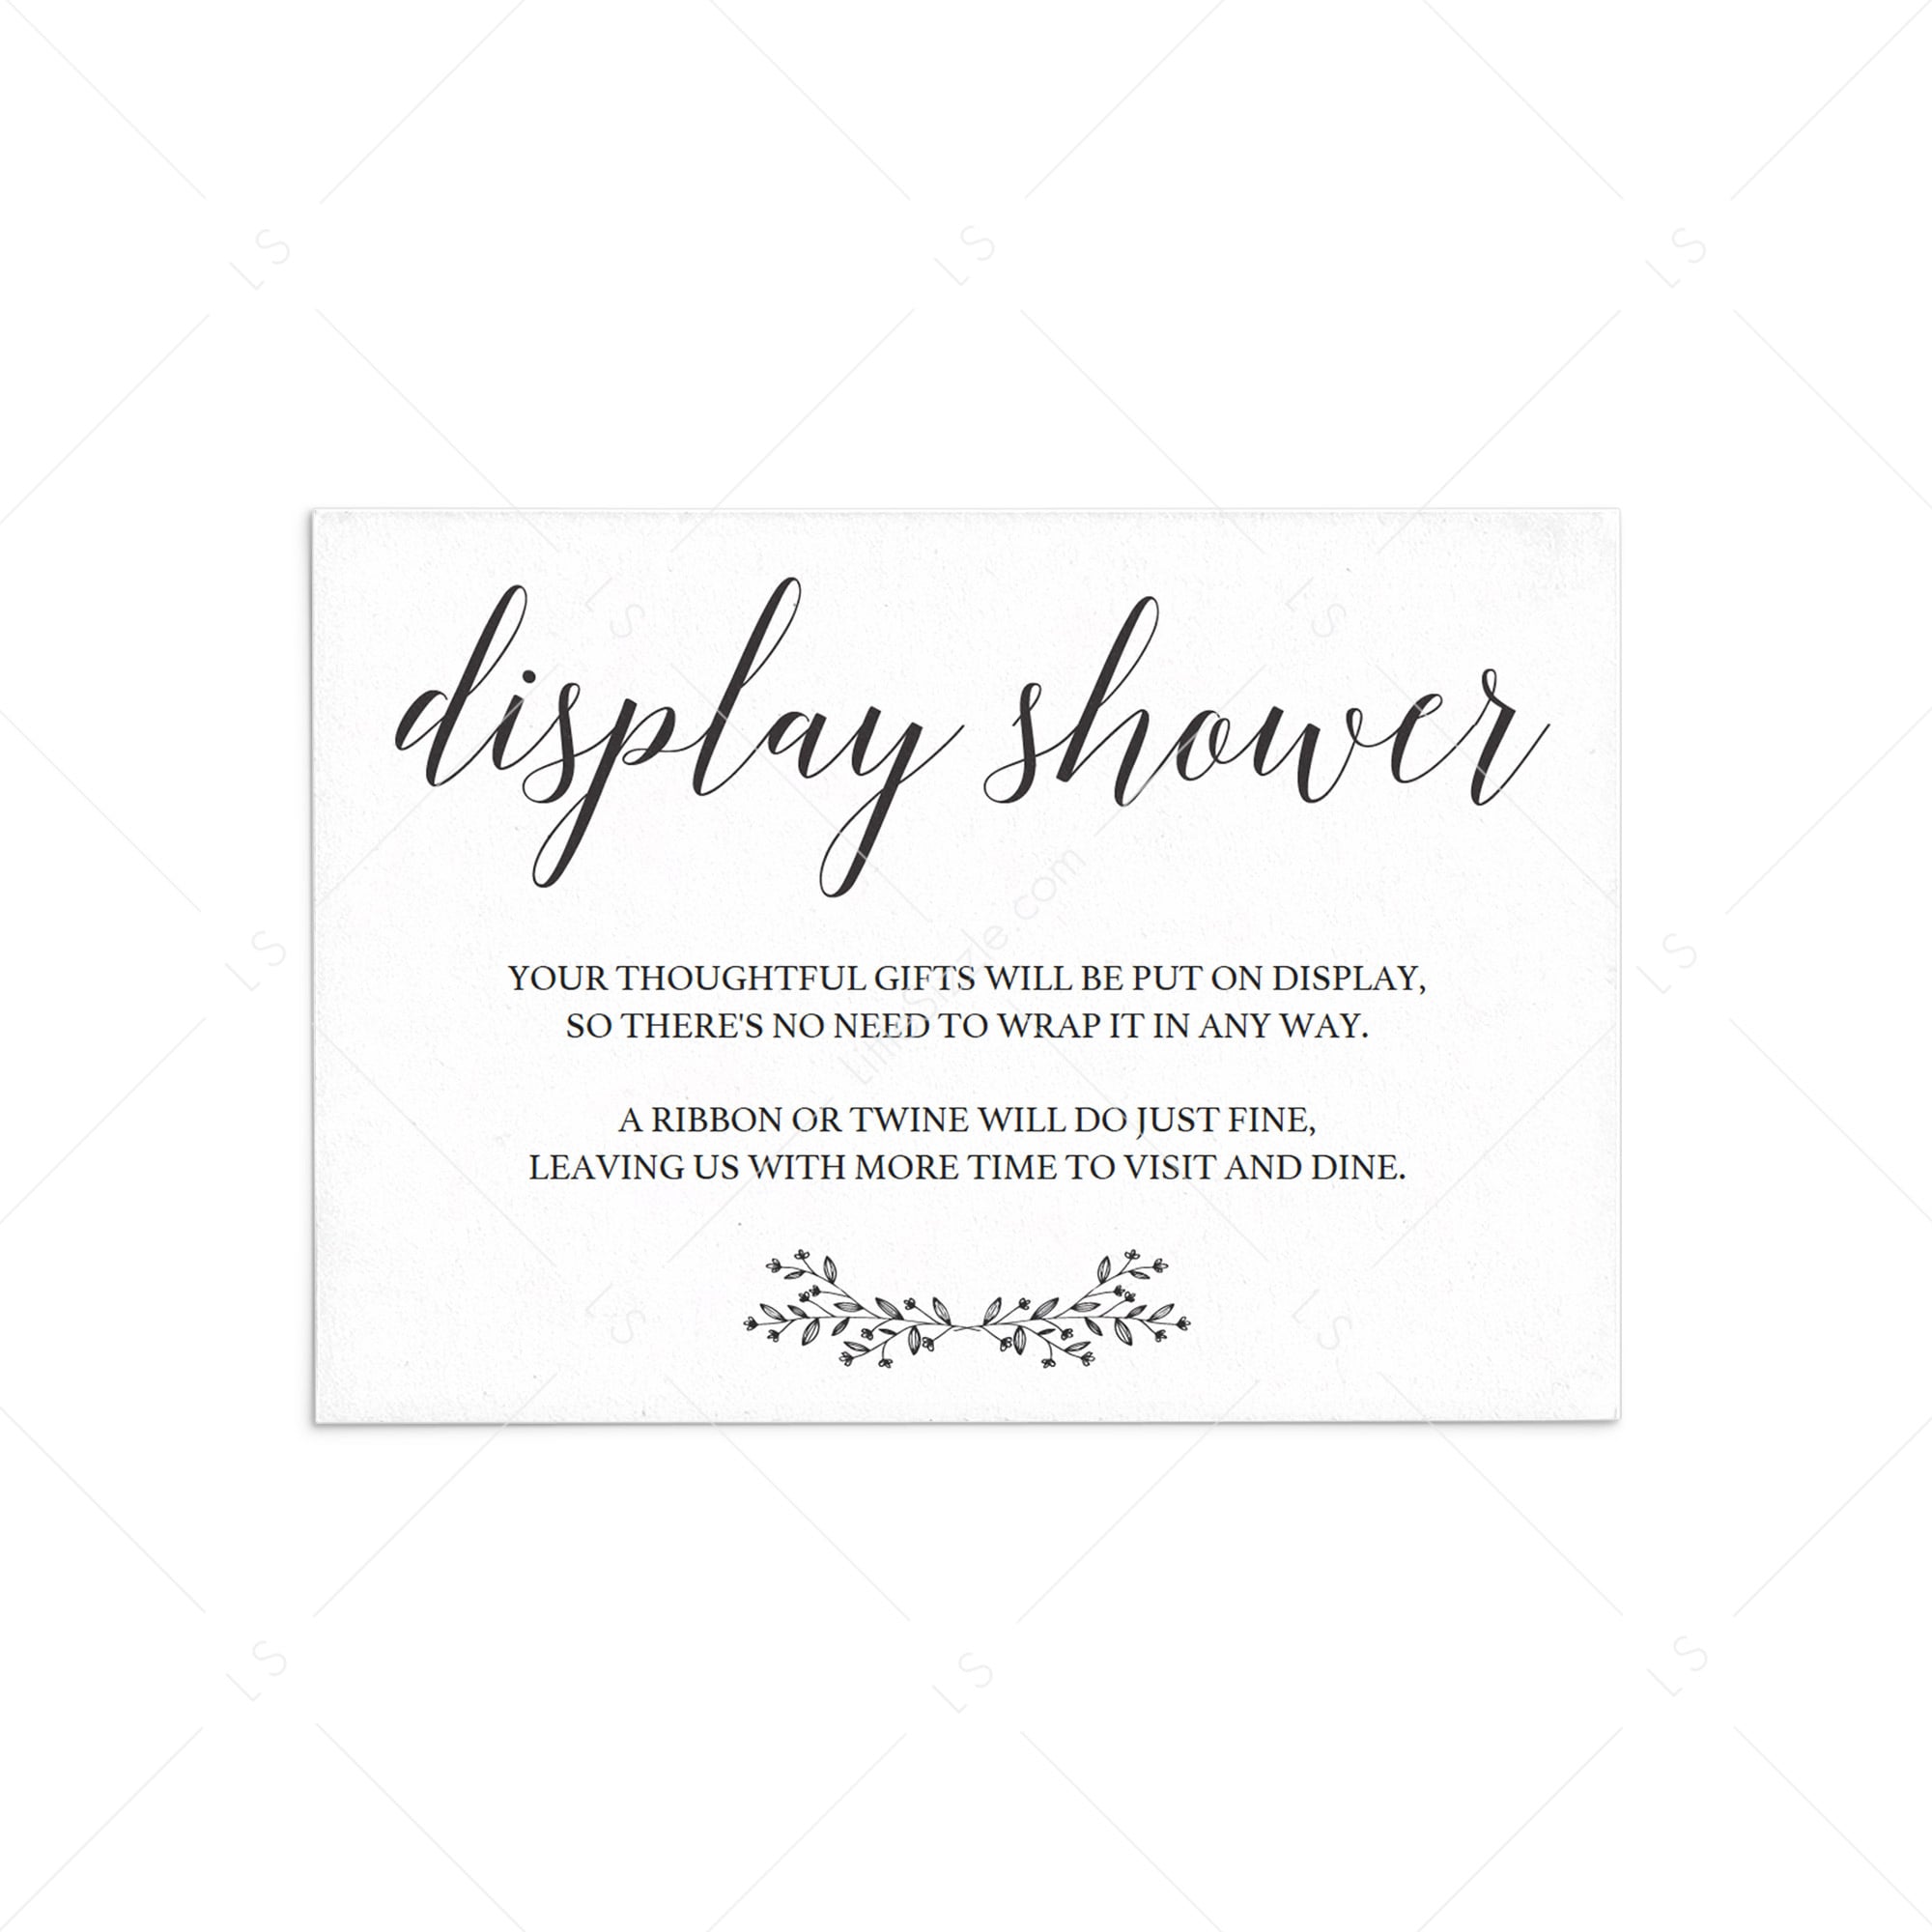 Minimal Display Shower Card Template by LittleSizzle